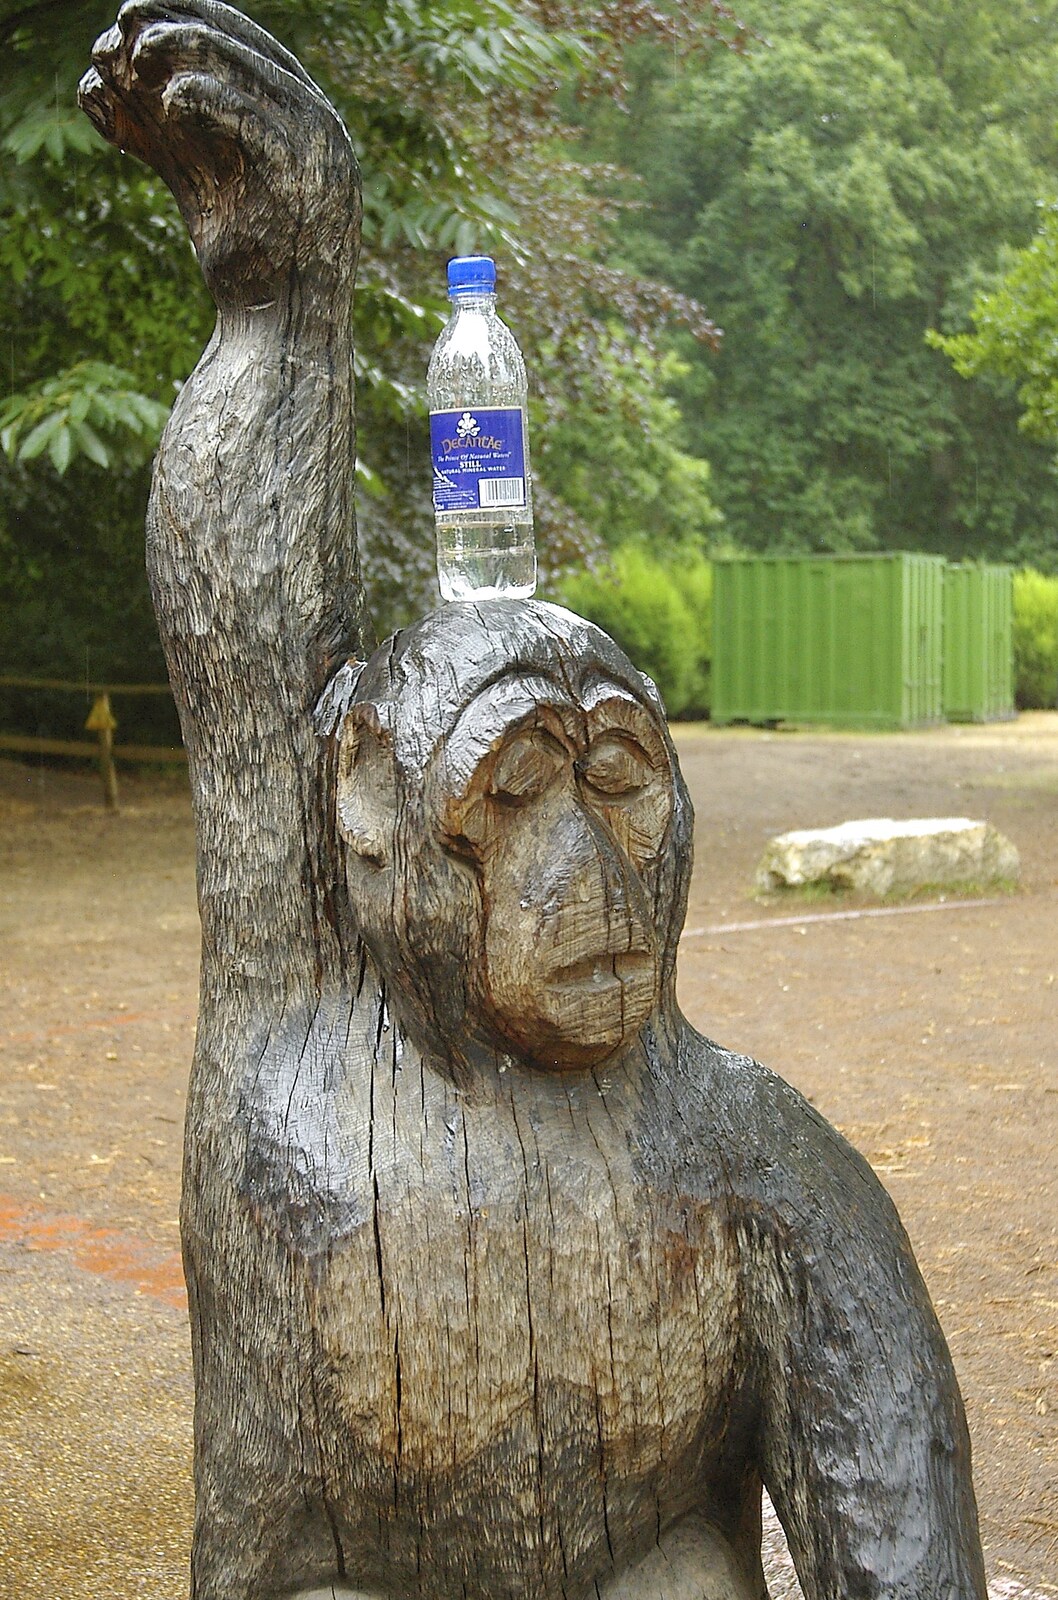 An ape sculpture has a bottle of water on its head from Qualcomm Cambridge "Go Ape", High Lodge, Thetford Forest - 27th July 2006